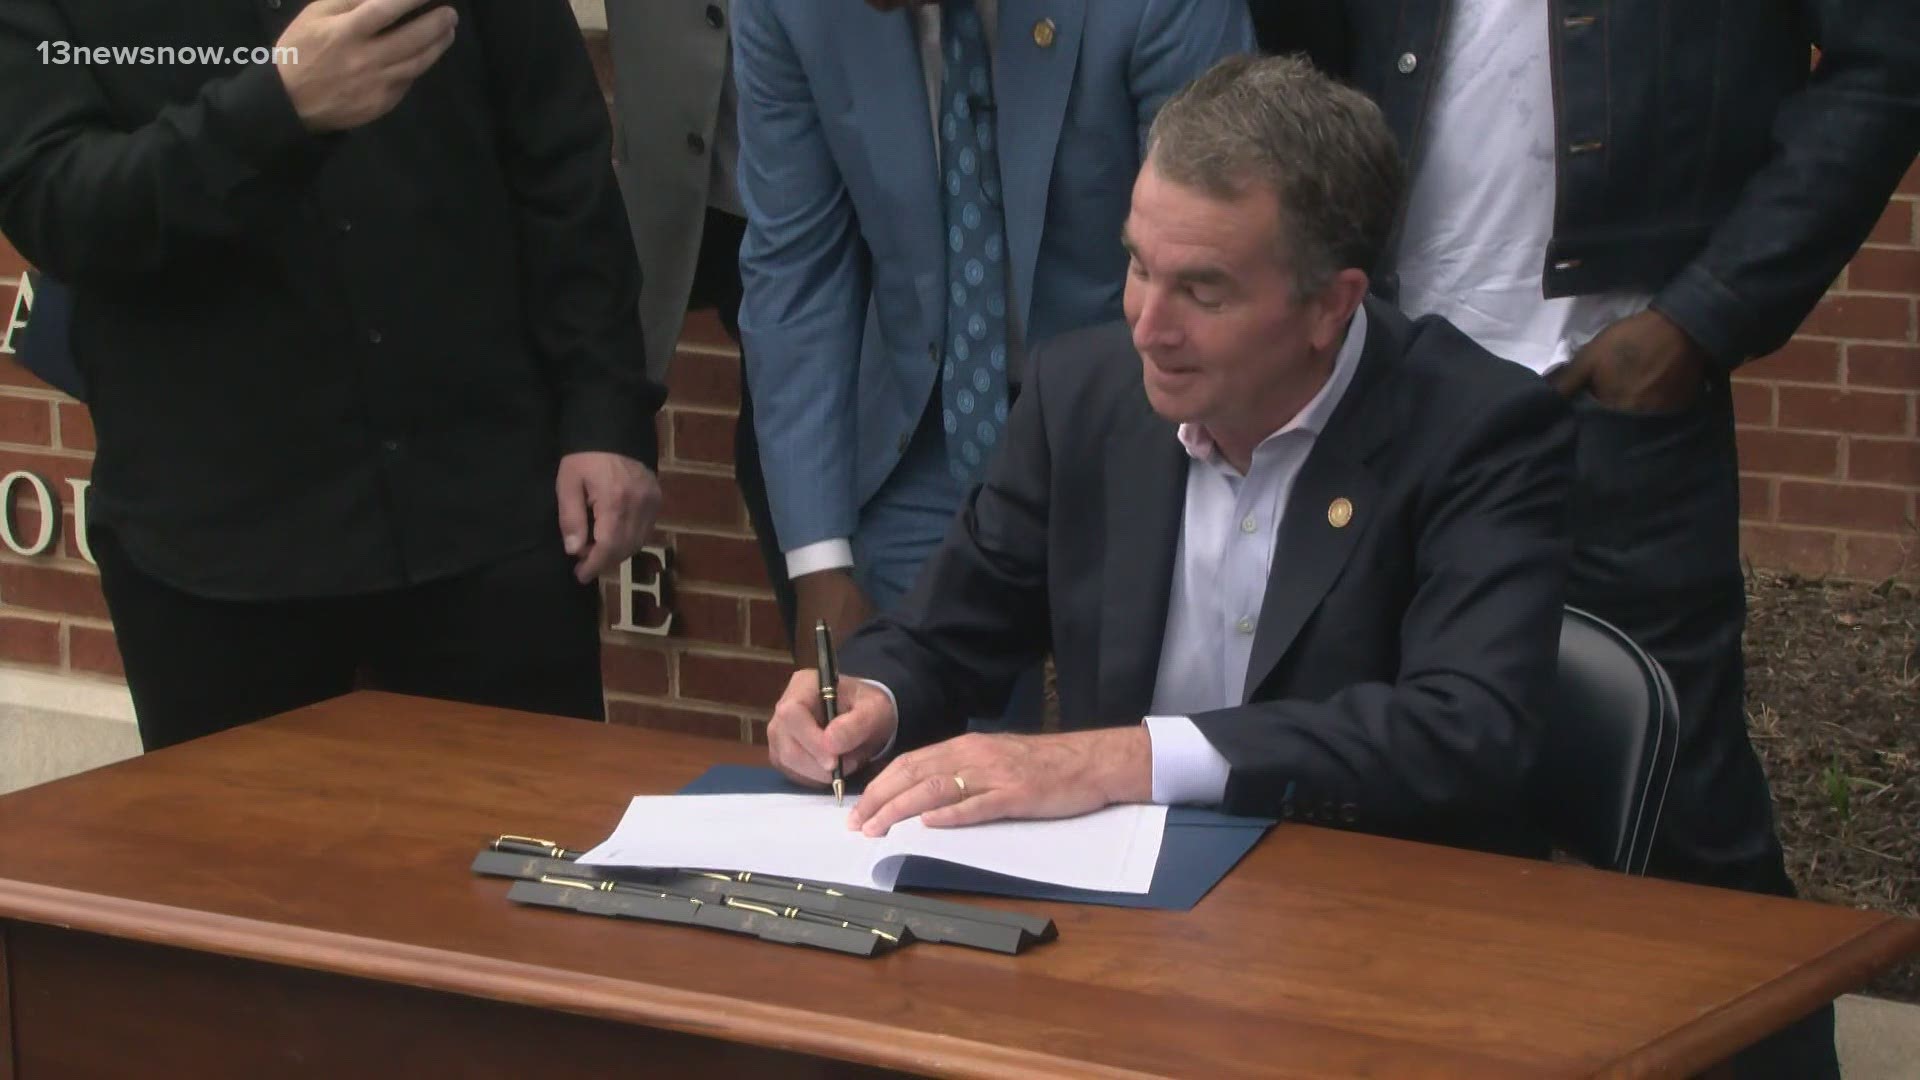 Changing the probation system in Virginia: that's the goal of a rapper who stood with Governor Ralph Northam as he signed a new bill to limit probation terms.